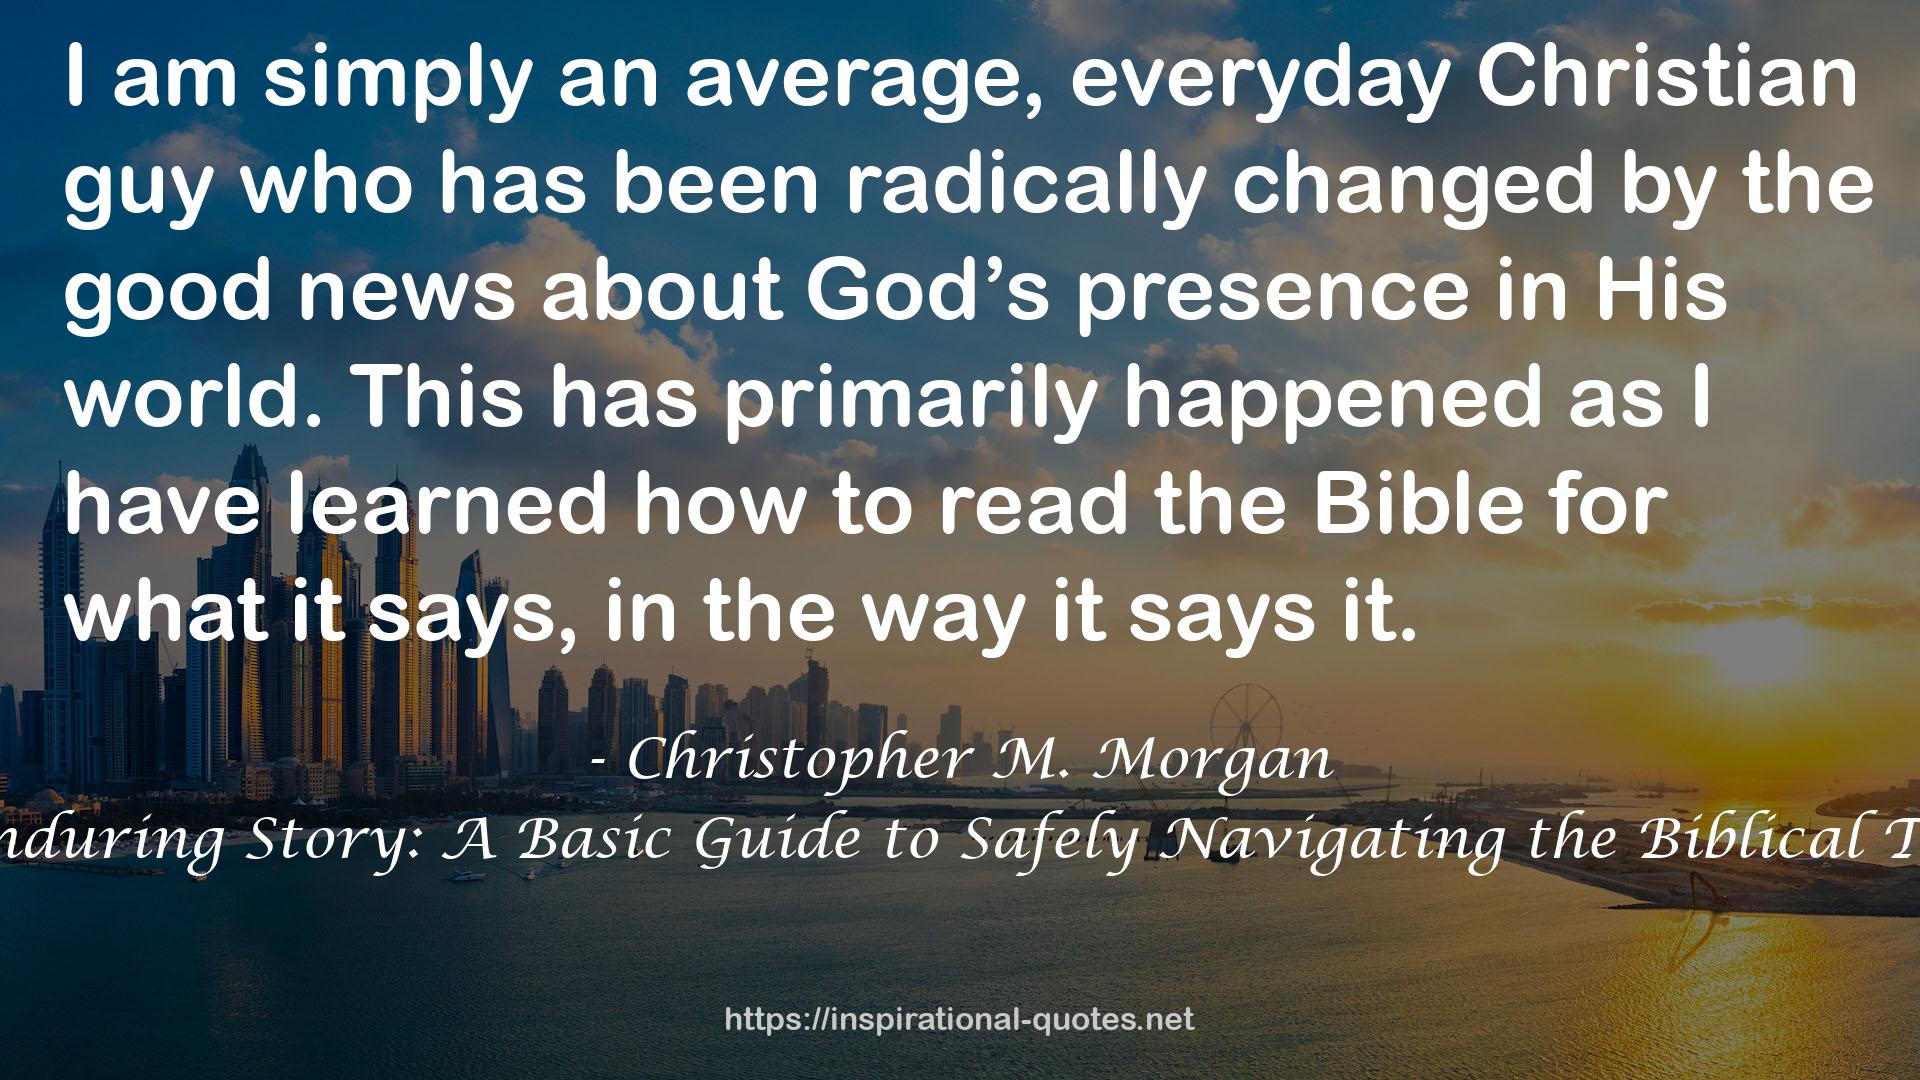 One Enduring Story: A Basic Guide to Safely Navigating the Biblical Terrain QUOTES